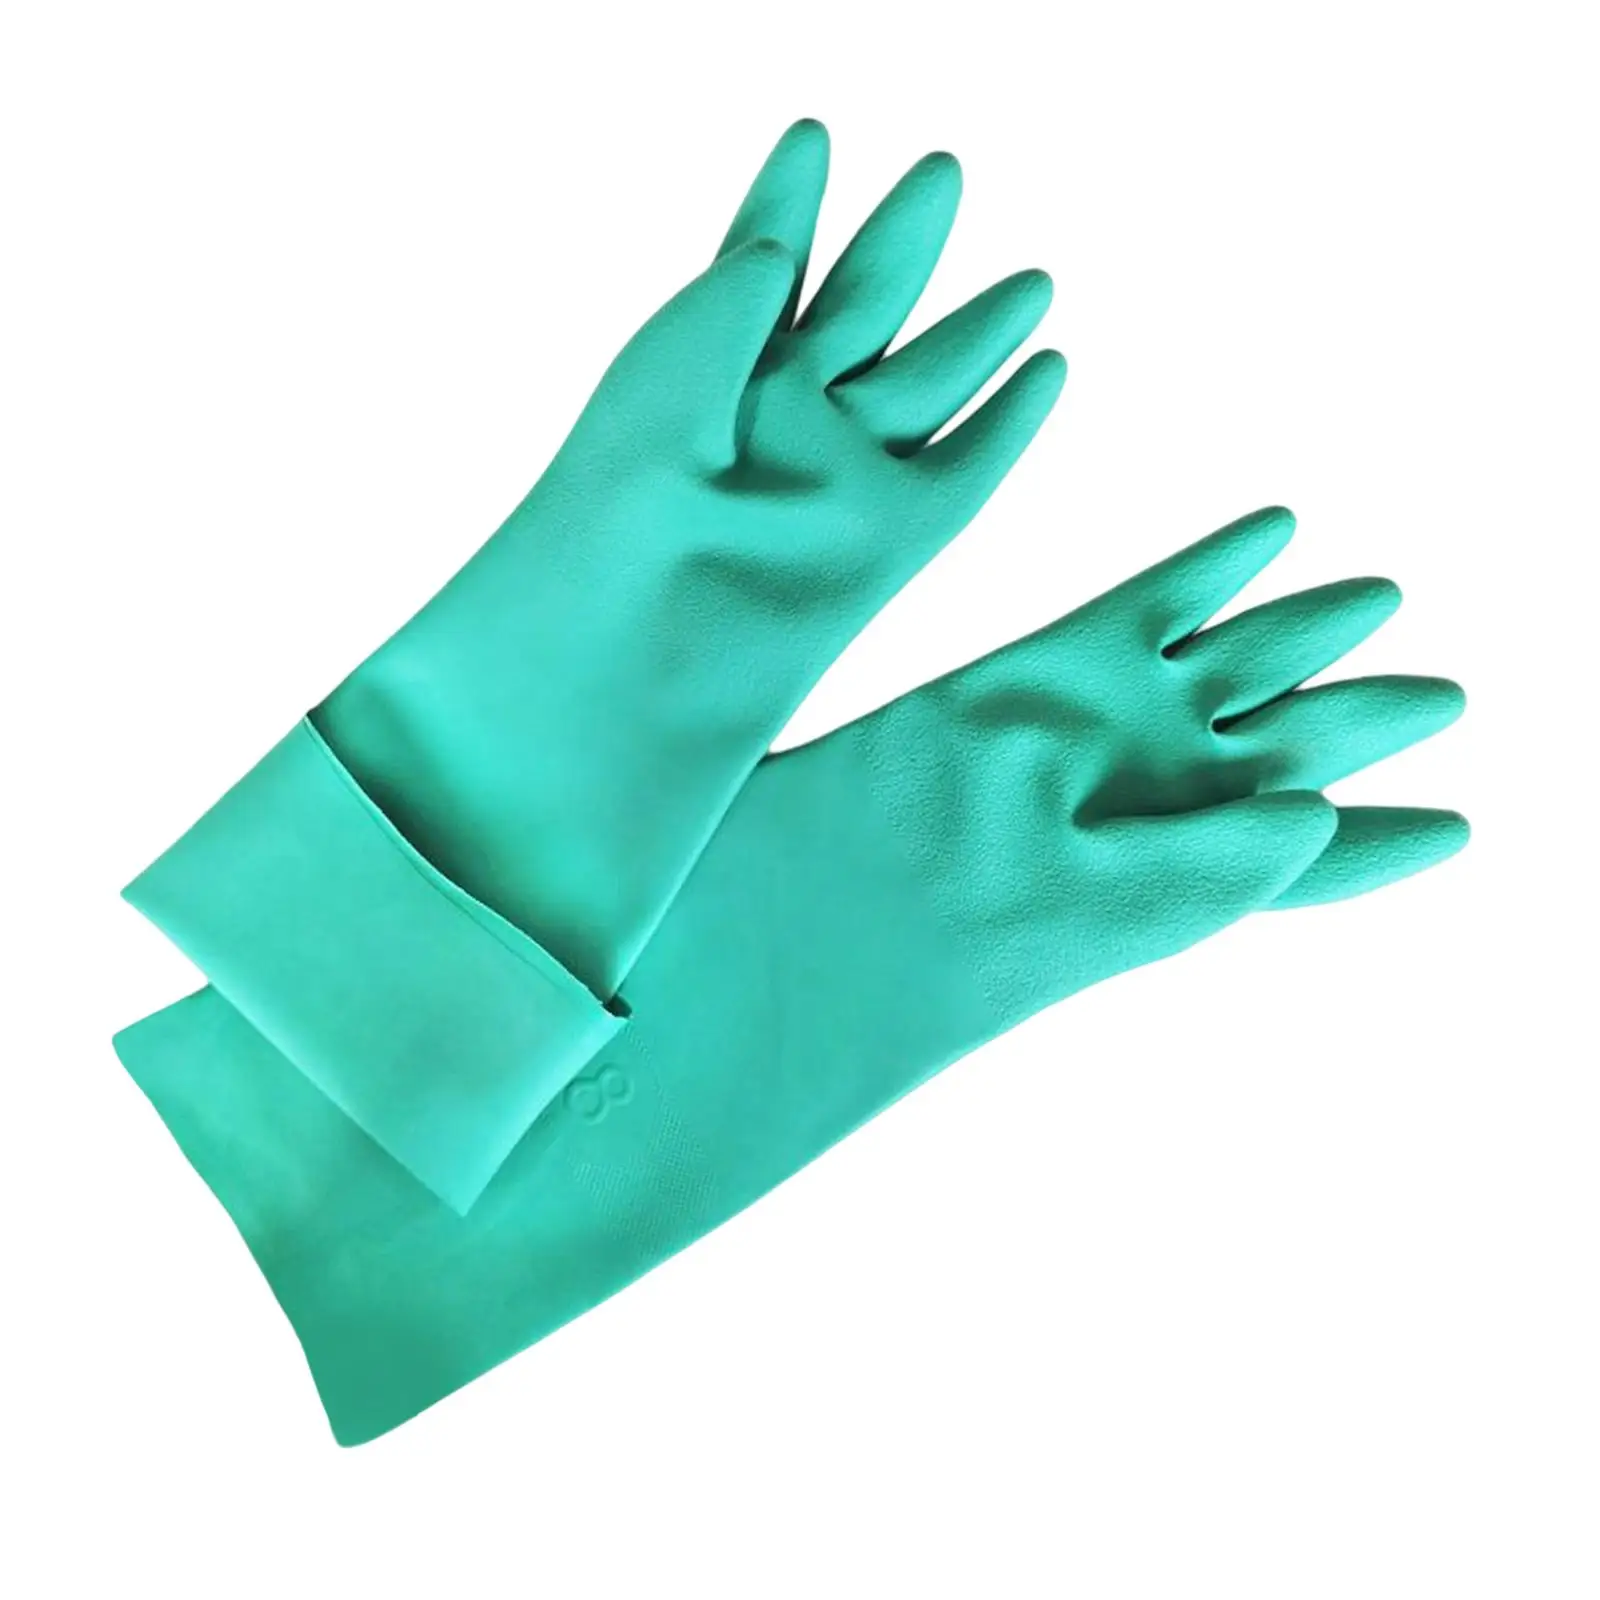 Household Nitrile Gloves Cleaning Hands Reusable Rubber Gloves for Kitchen